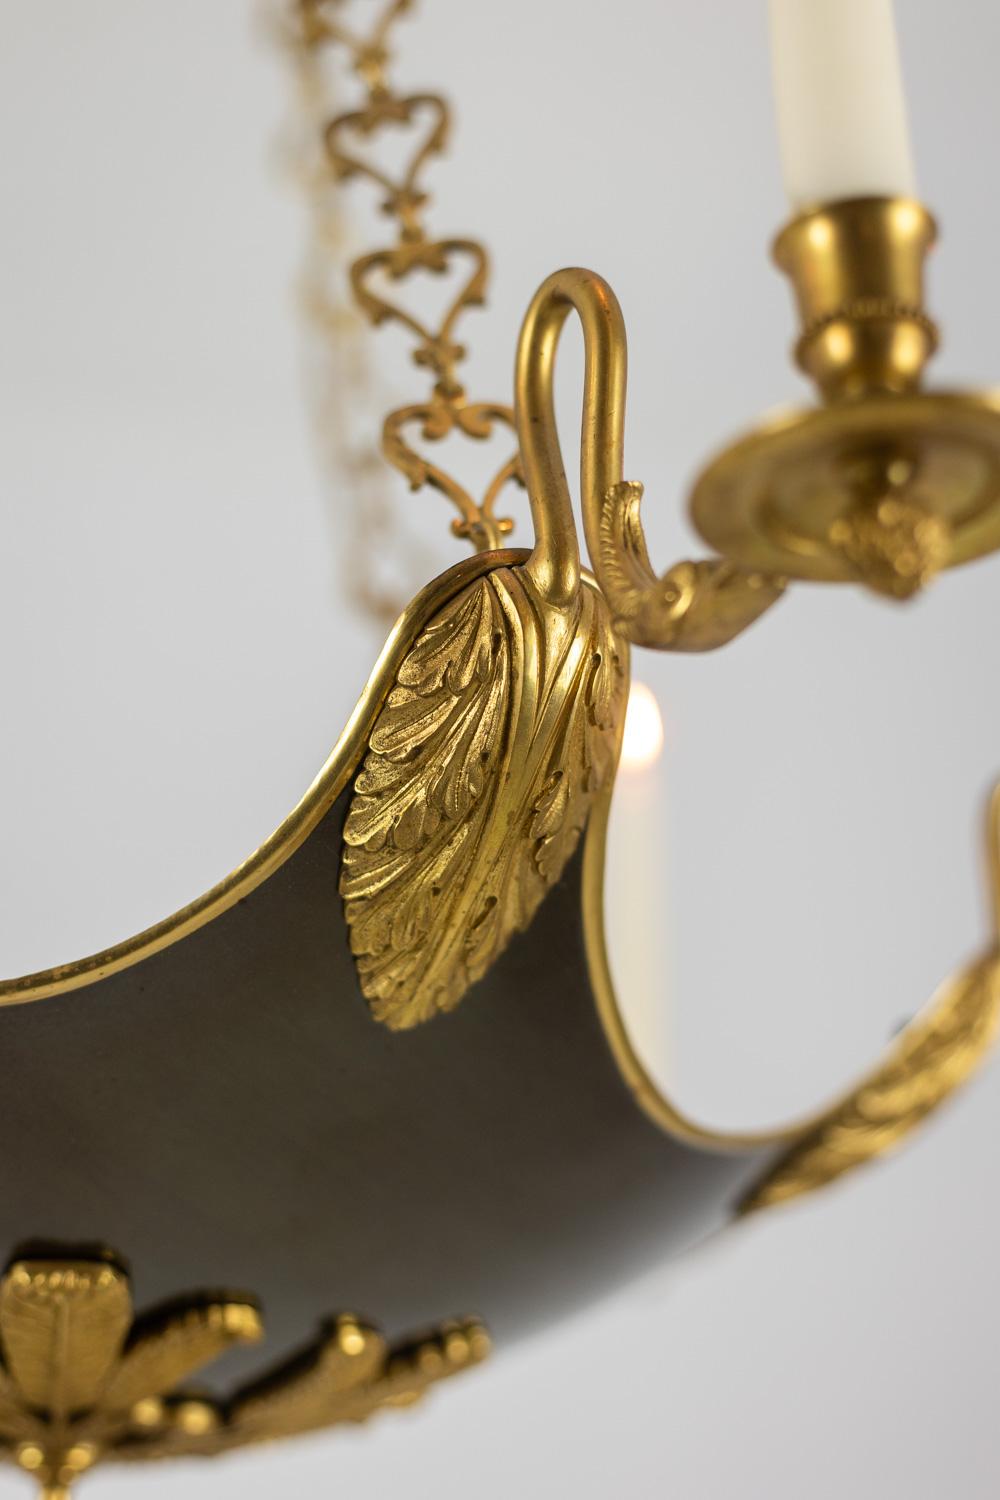 Maison Baguès, by.

Empire or Restoration style chandelier in gilded bronze and black lacquered sheet metal, with six arms of light, allowing the placement of six candles, decorated with swans’ necks, whose bobeches end with stylized tassels and are